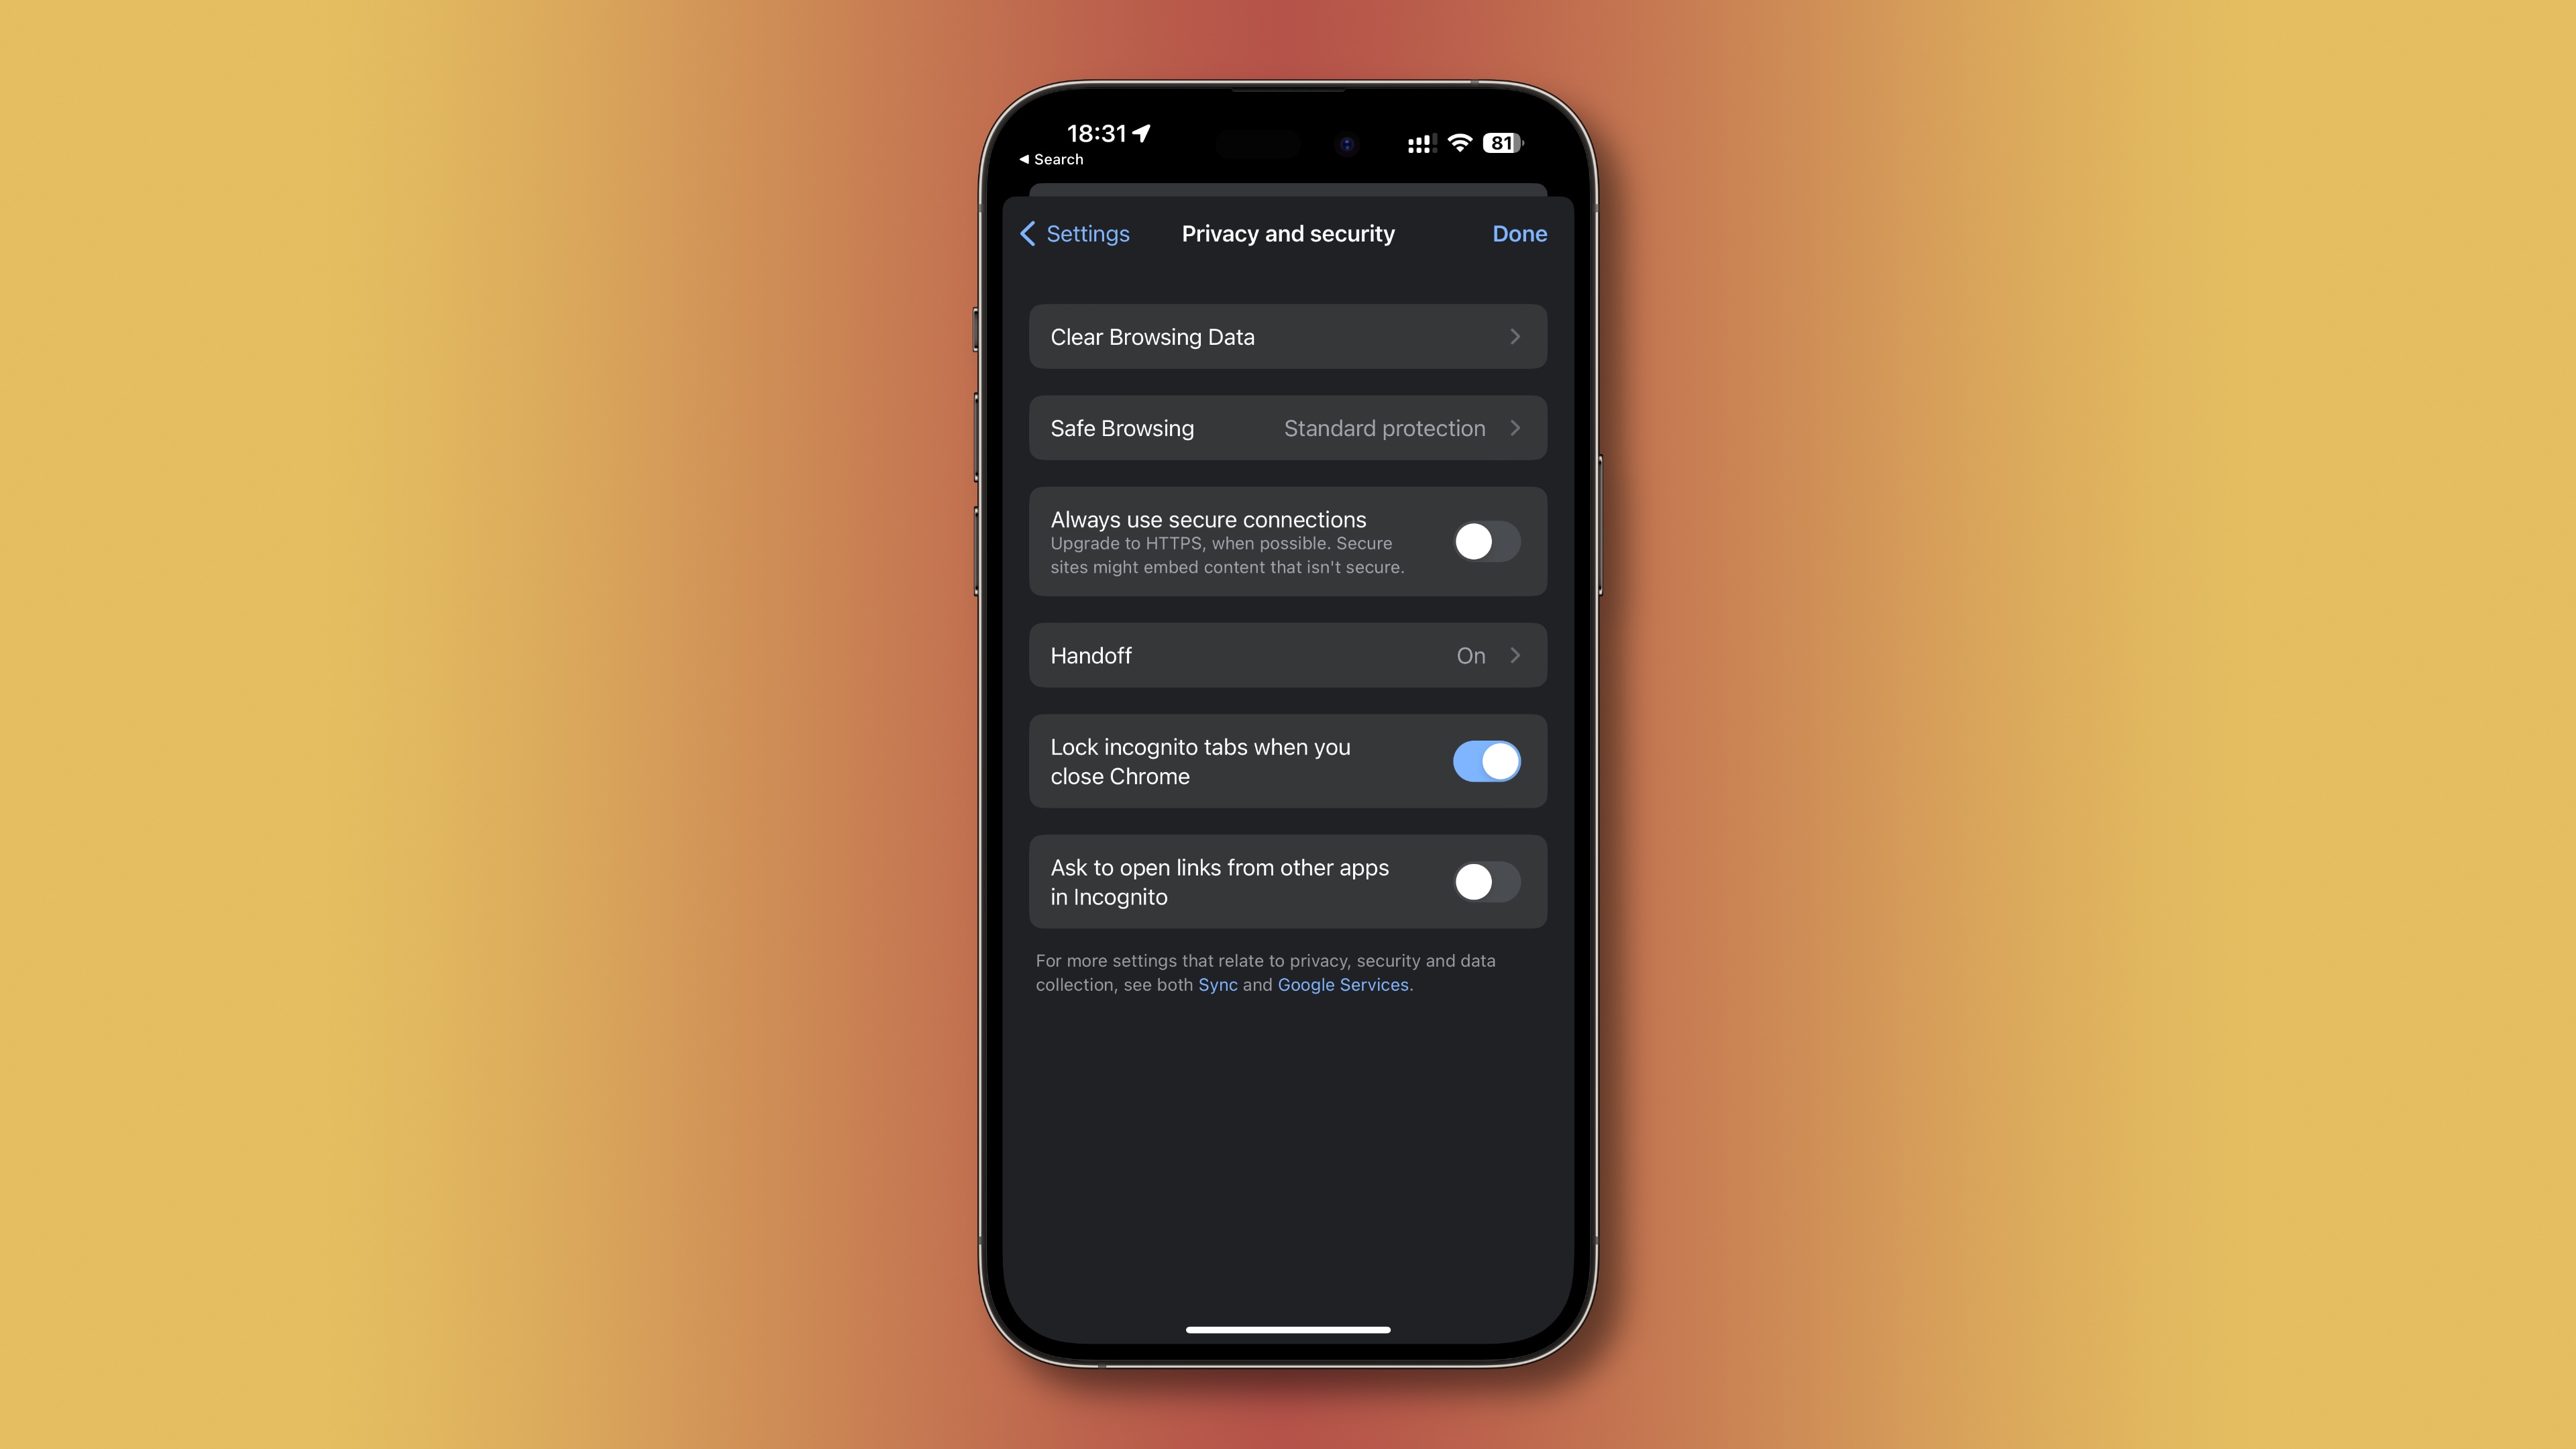 The settings toggle to require Face ID authentication to access Incognito in Chrome for iOS